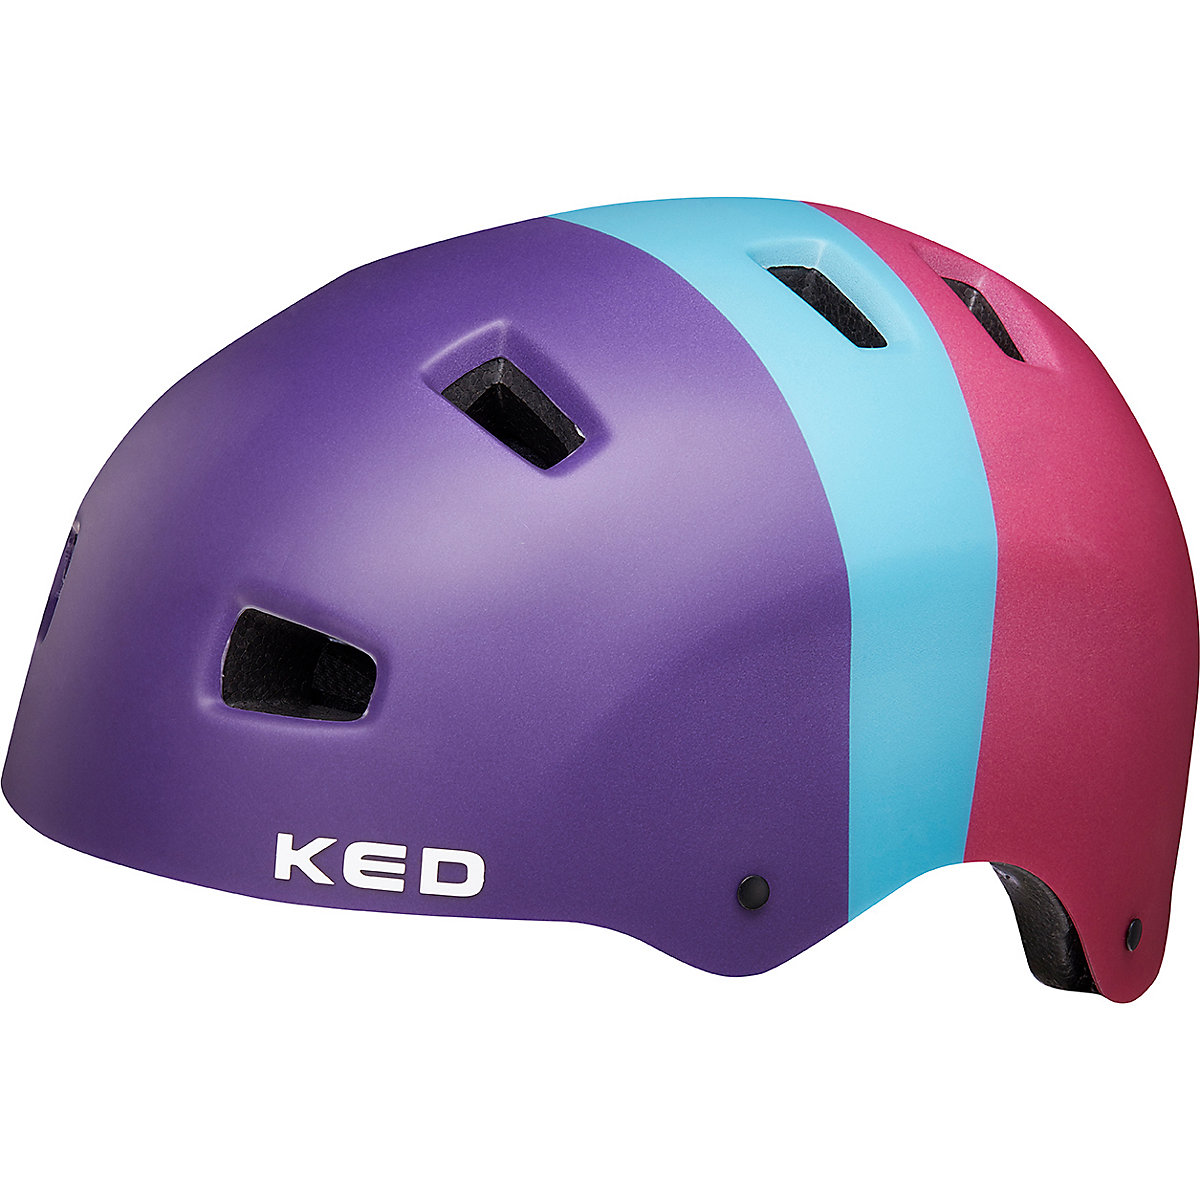 KED Helmsysteme Fahrradhelm 5Forty 3 colors retro rave